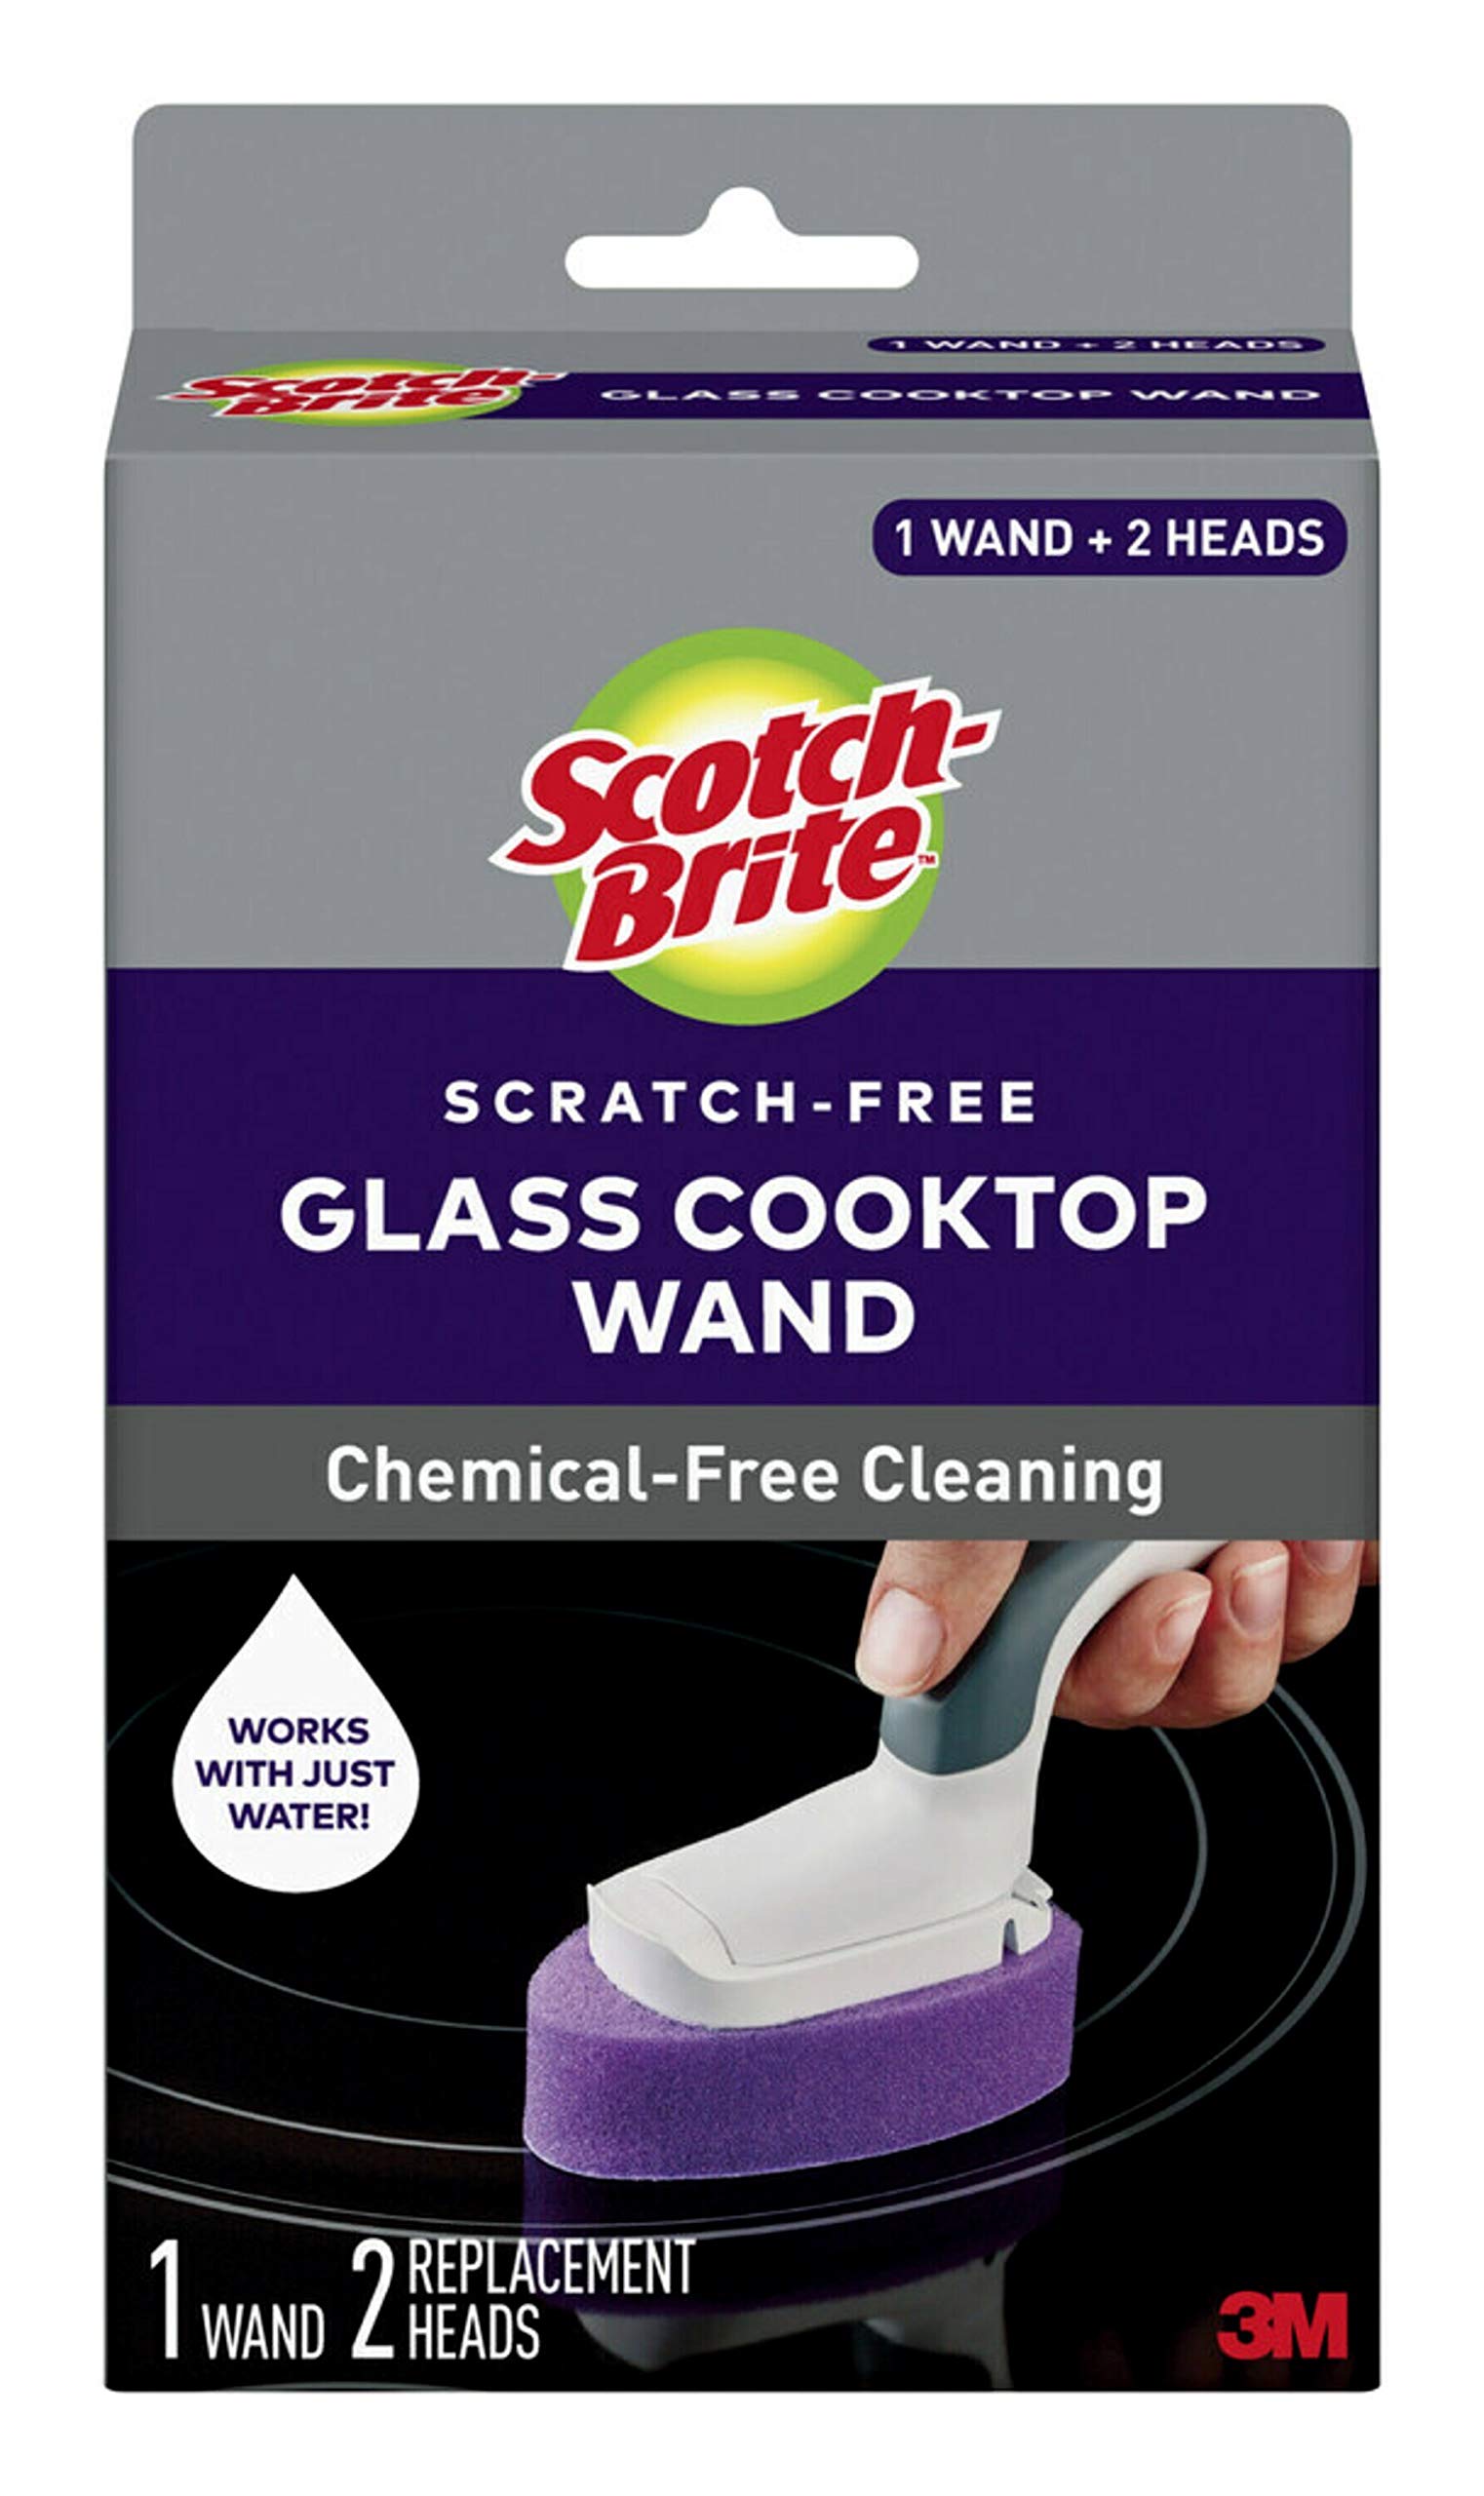 Scotch-Brite Glass Cooktop Wand with Refill Pads, Cleans With Just Water,  Tackle Burnt-On Messes, 1 Wand and 2 Replacement Heads